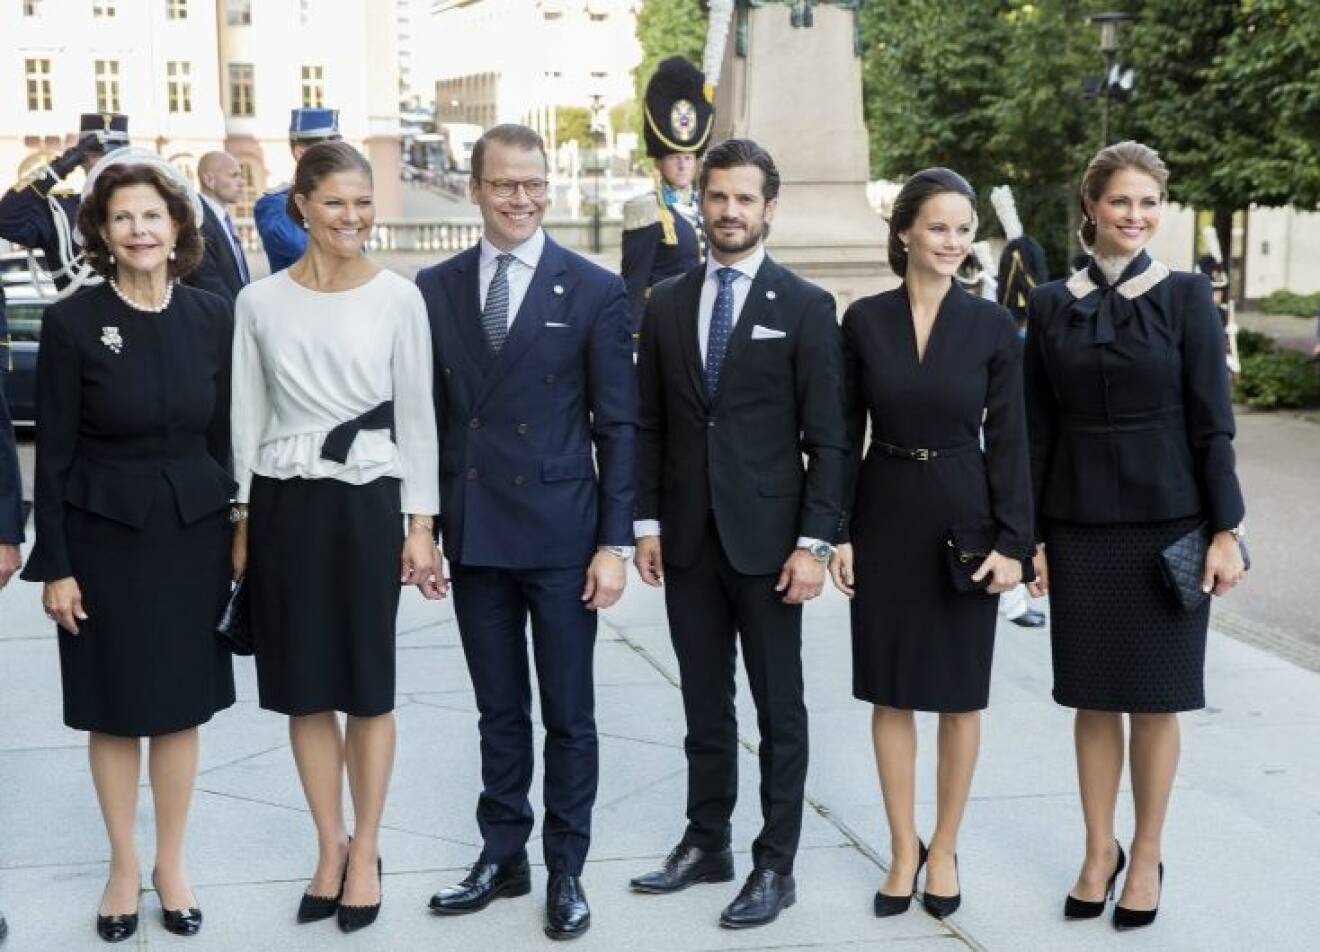 2016 Opening parliamentary year in Sweden